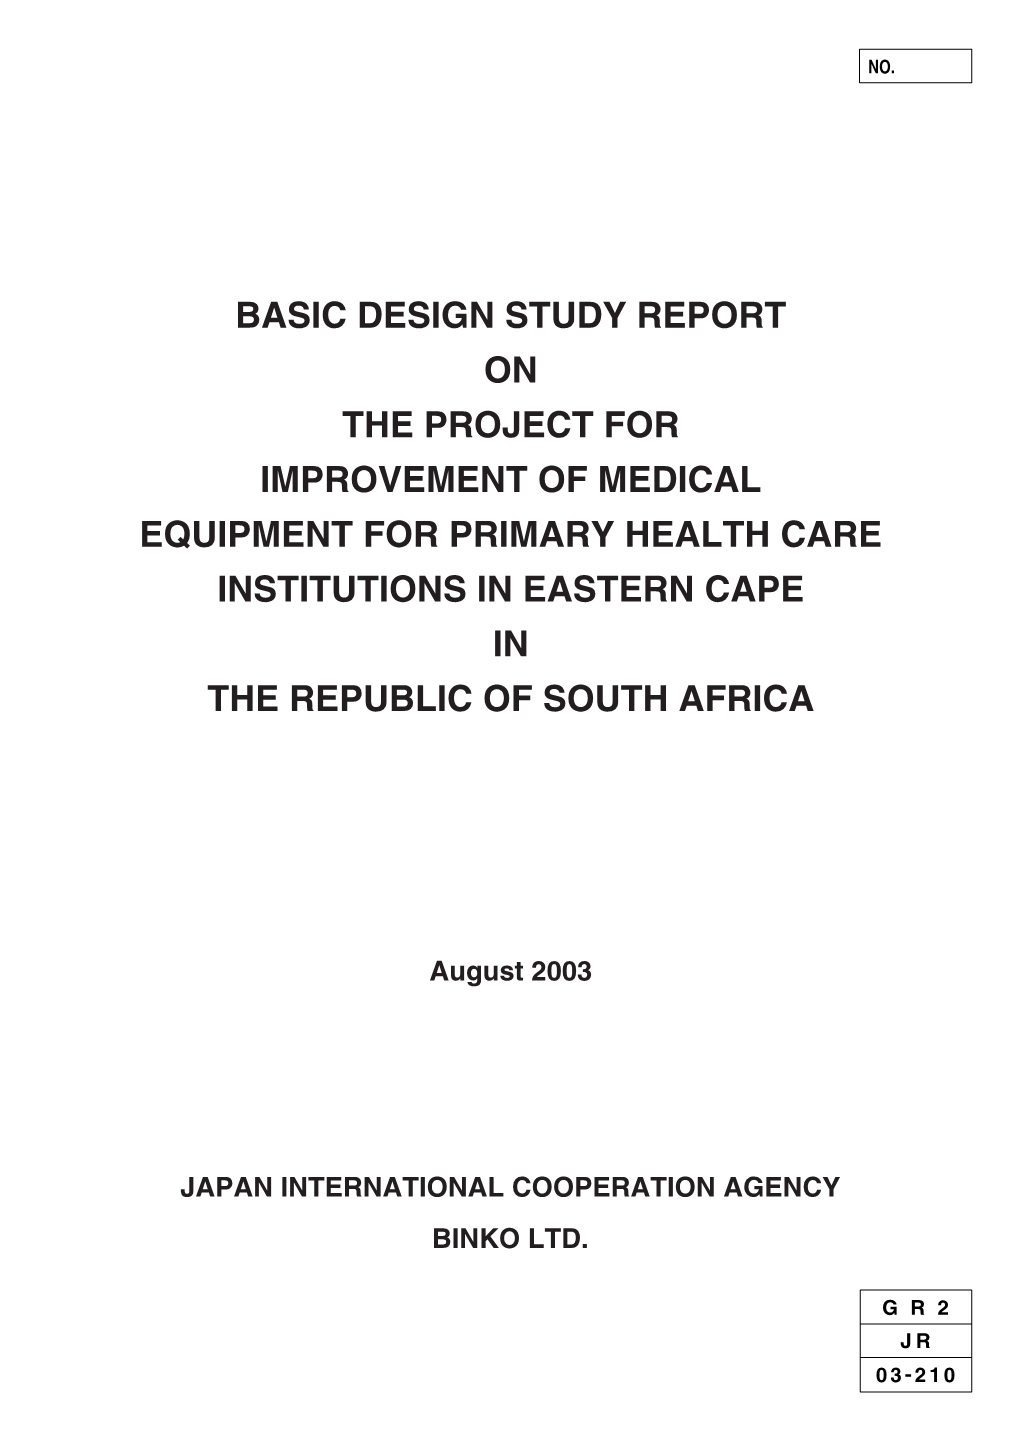 Basic Design Study Report on the Project for Improvement of Medical Equipment for Primary Health Care Institutions in Eastern Cape in the Republic of South Africa